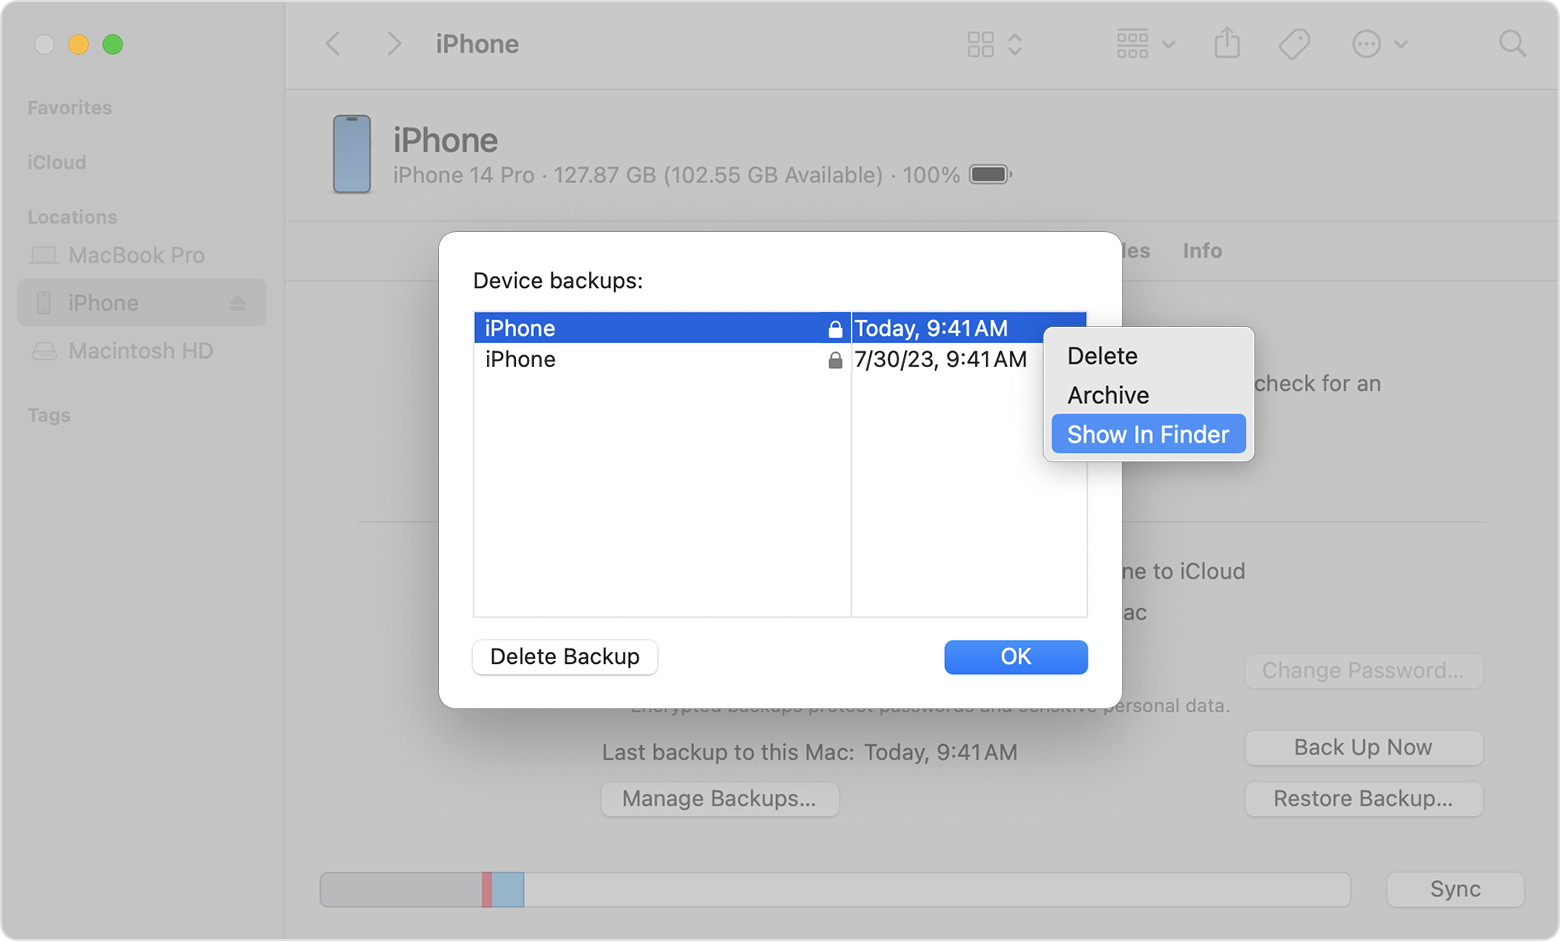 The Finder window with Show In Finder as the selected option